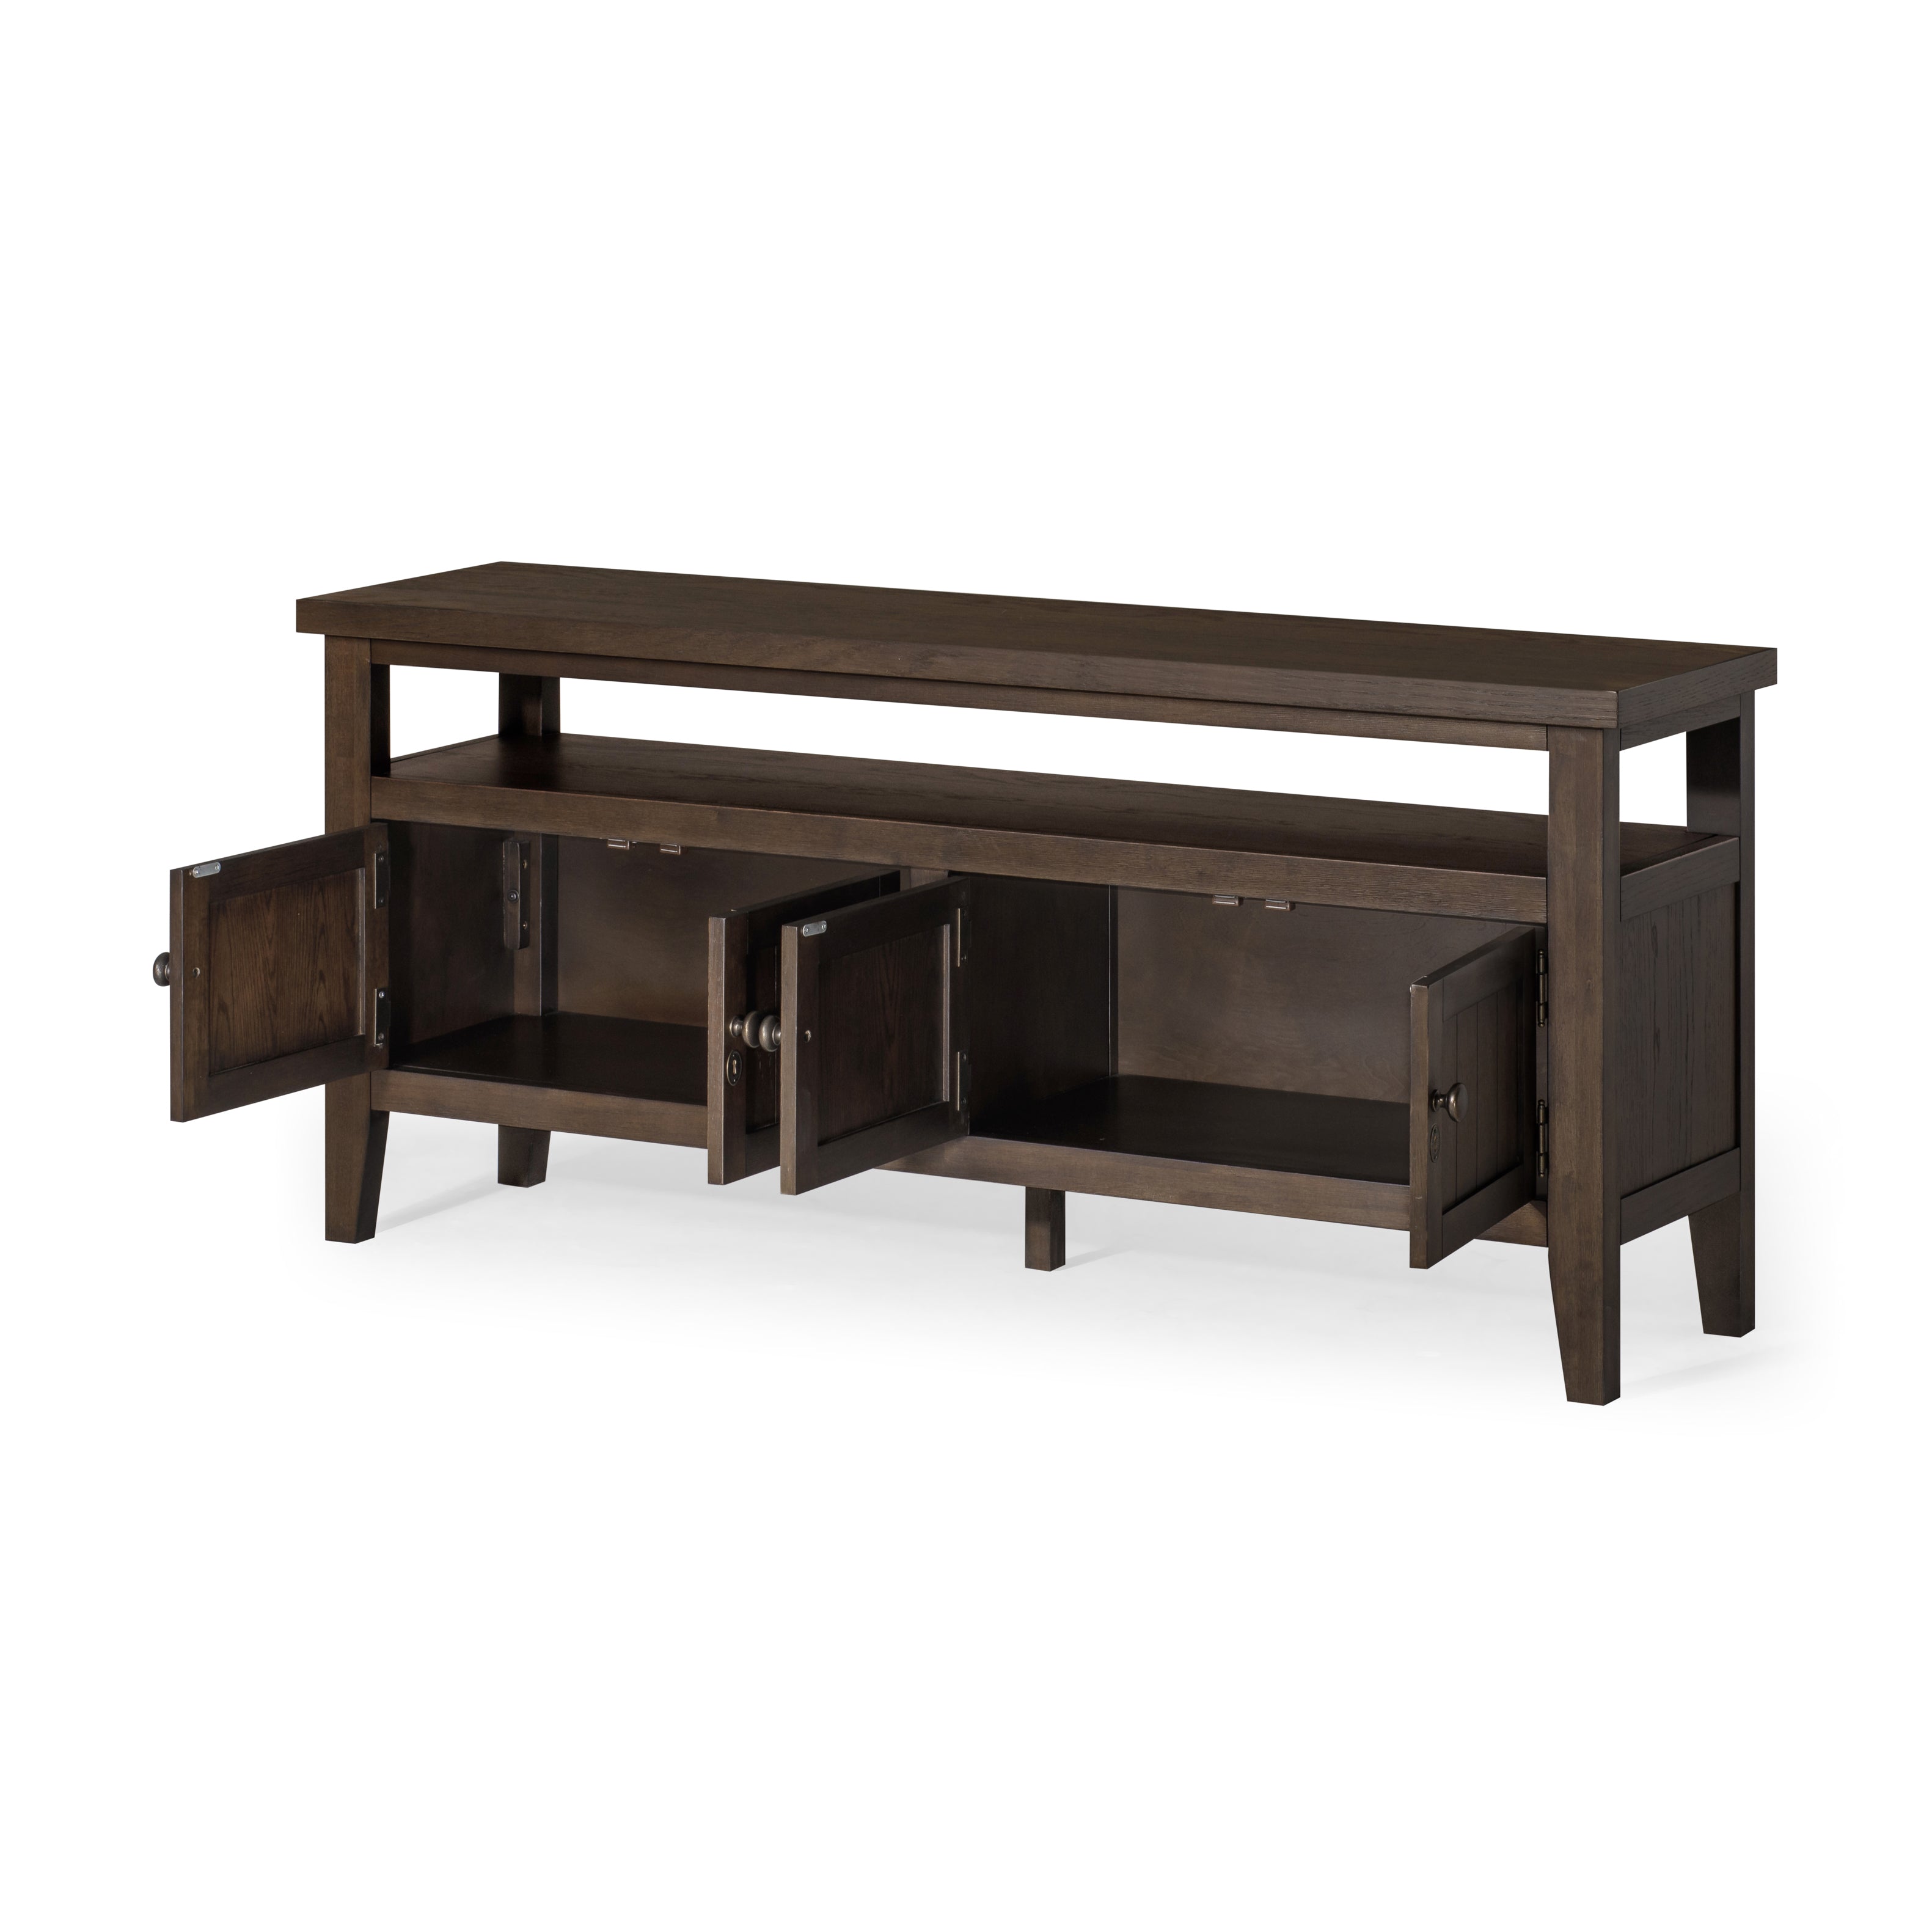 Turner Classical Wooden Media Unit in Antiqued Brown Finish in Media Units by Maven Lane